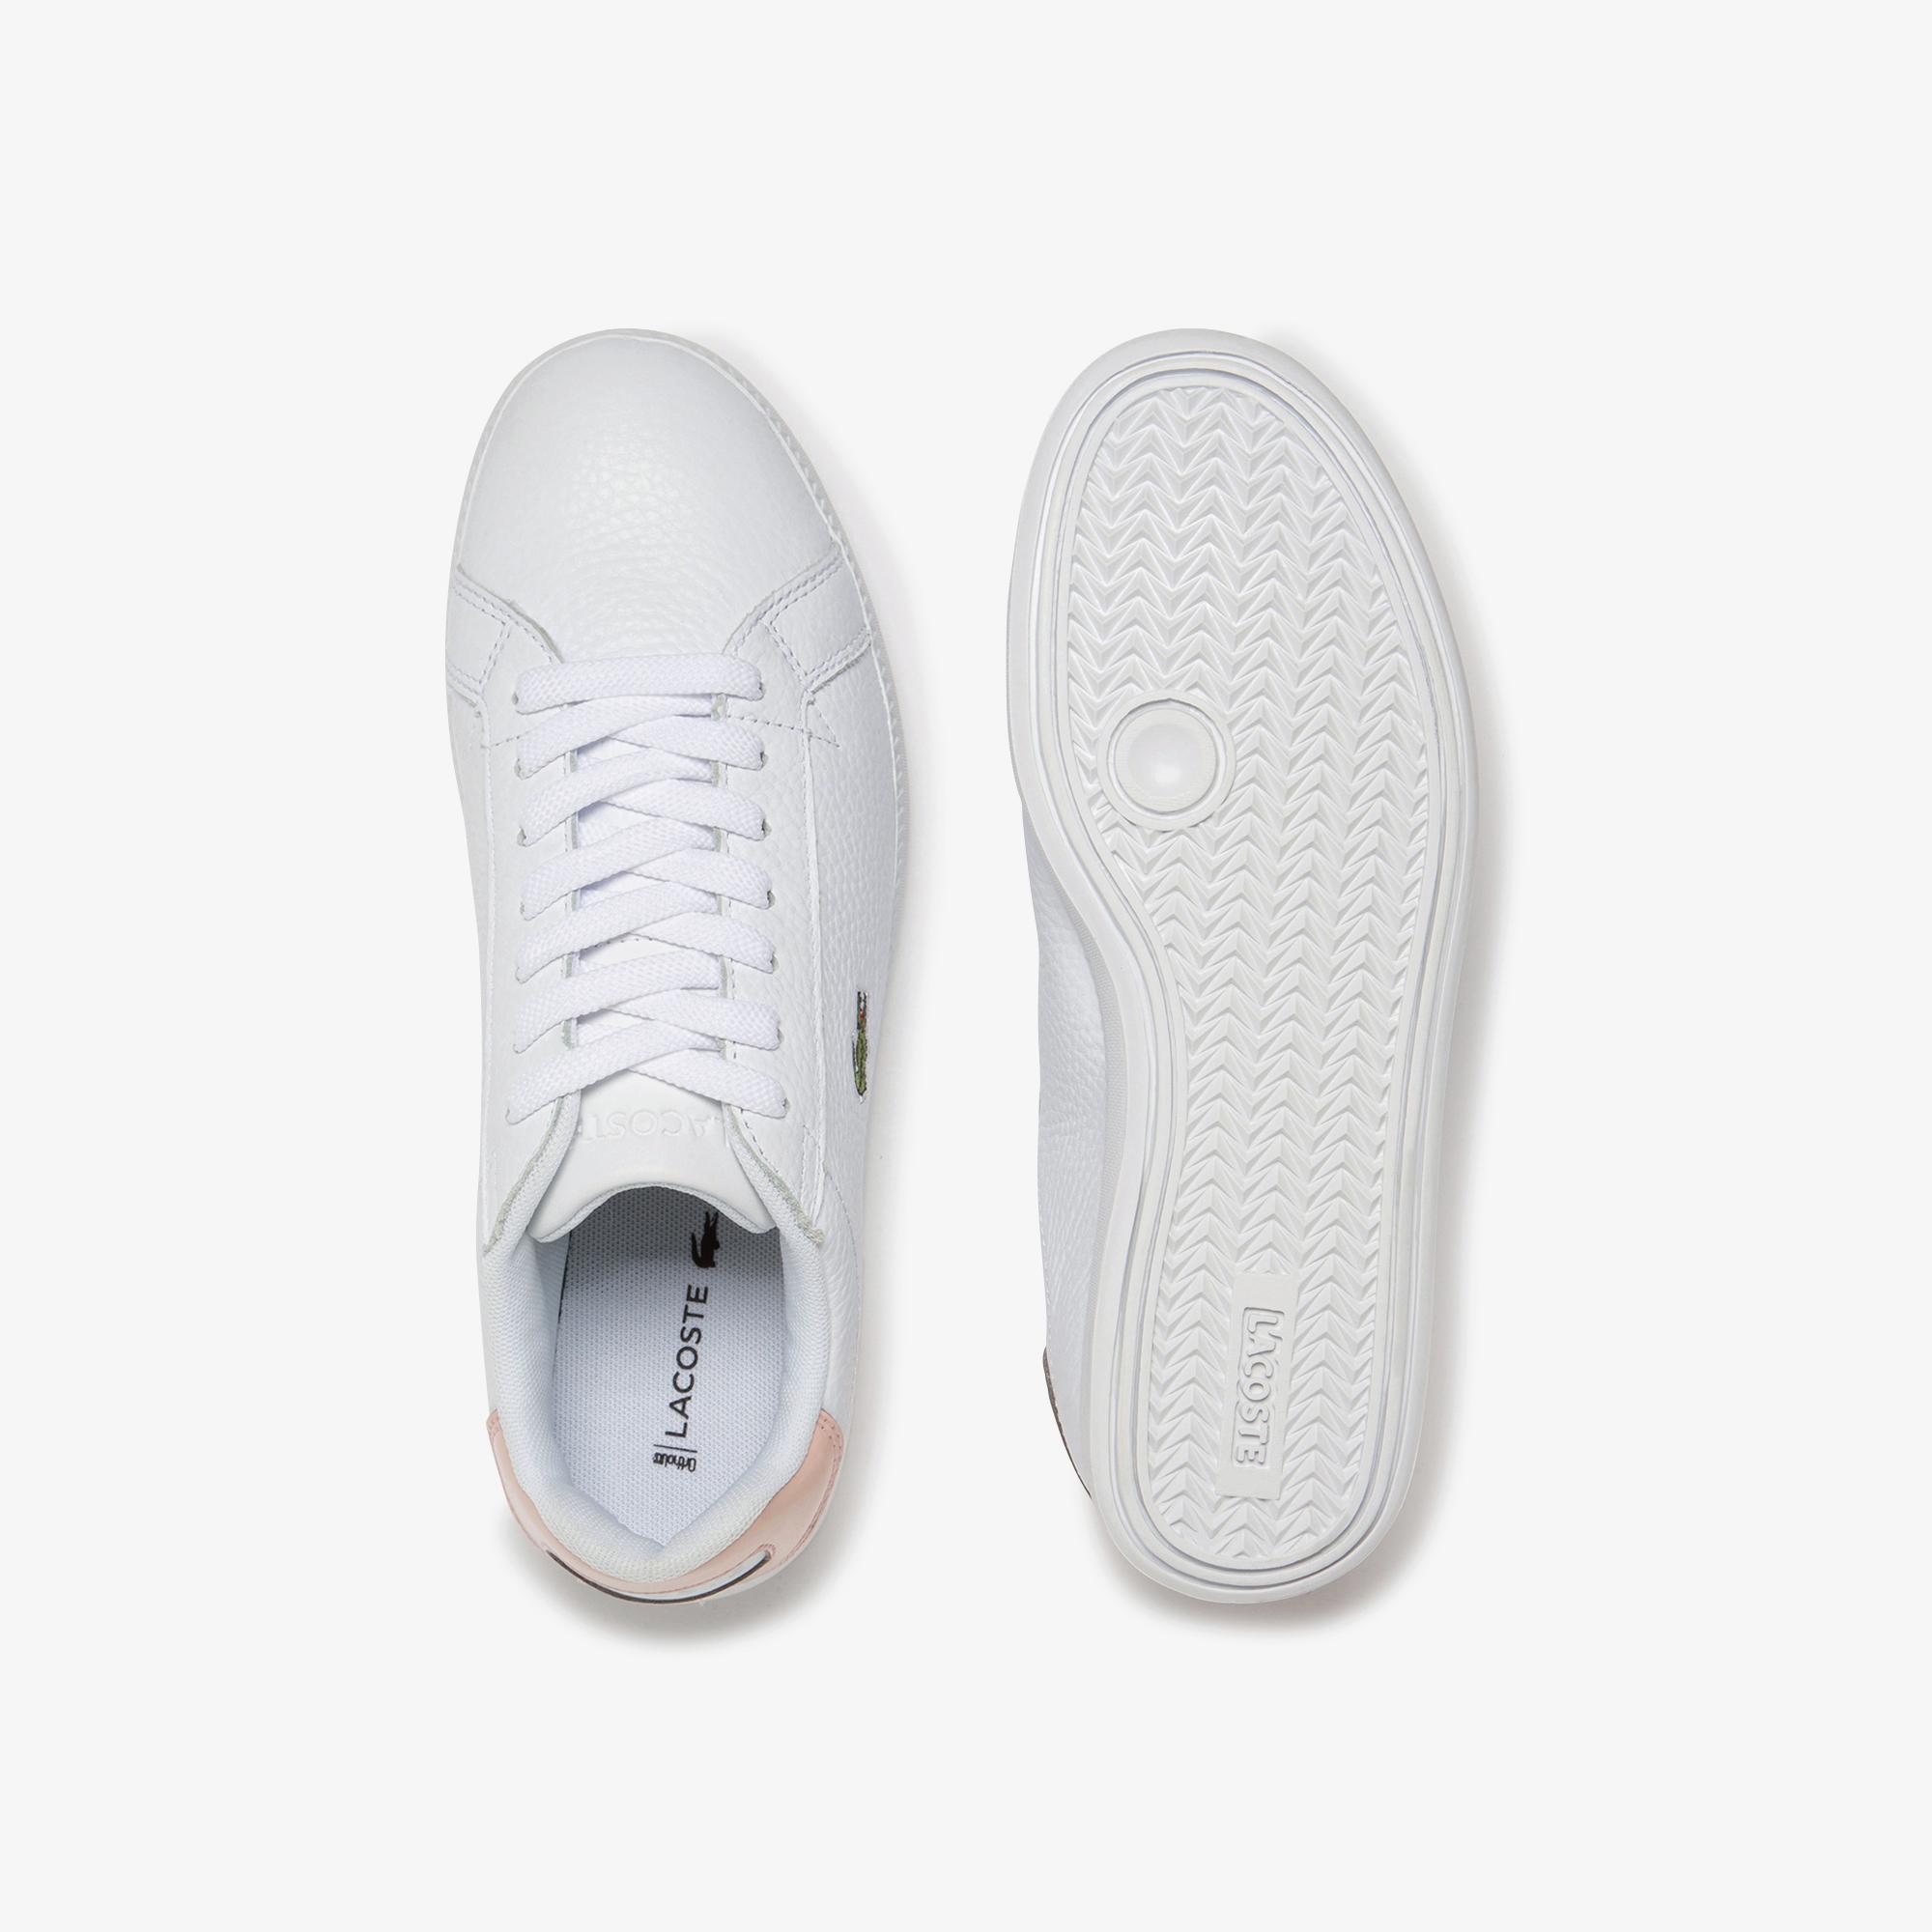 Lacoste Graduate 120 1 Sfa Women's white and pink sneakers